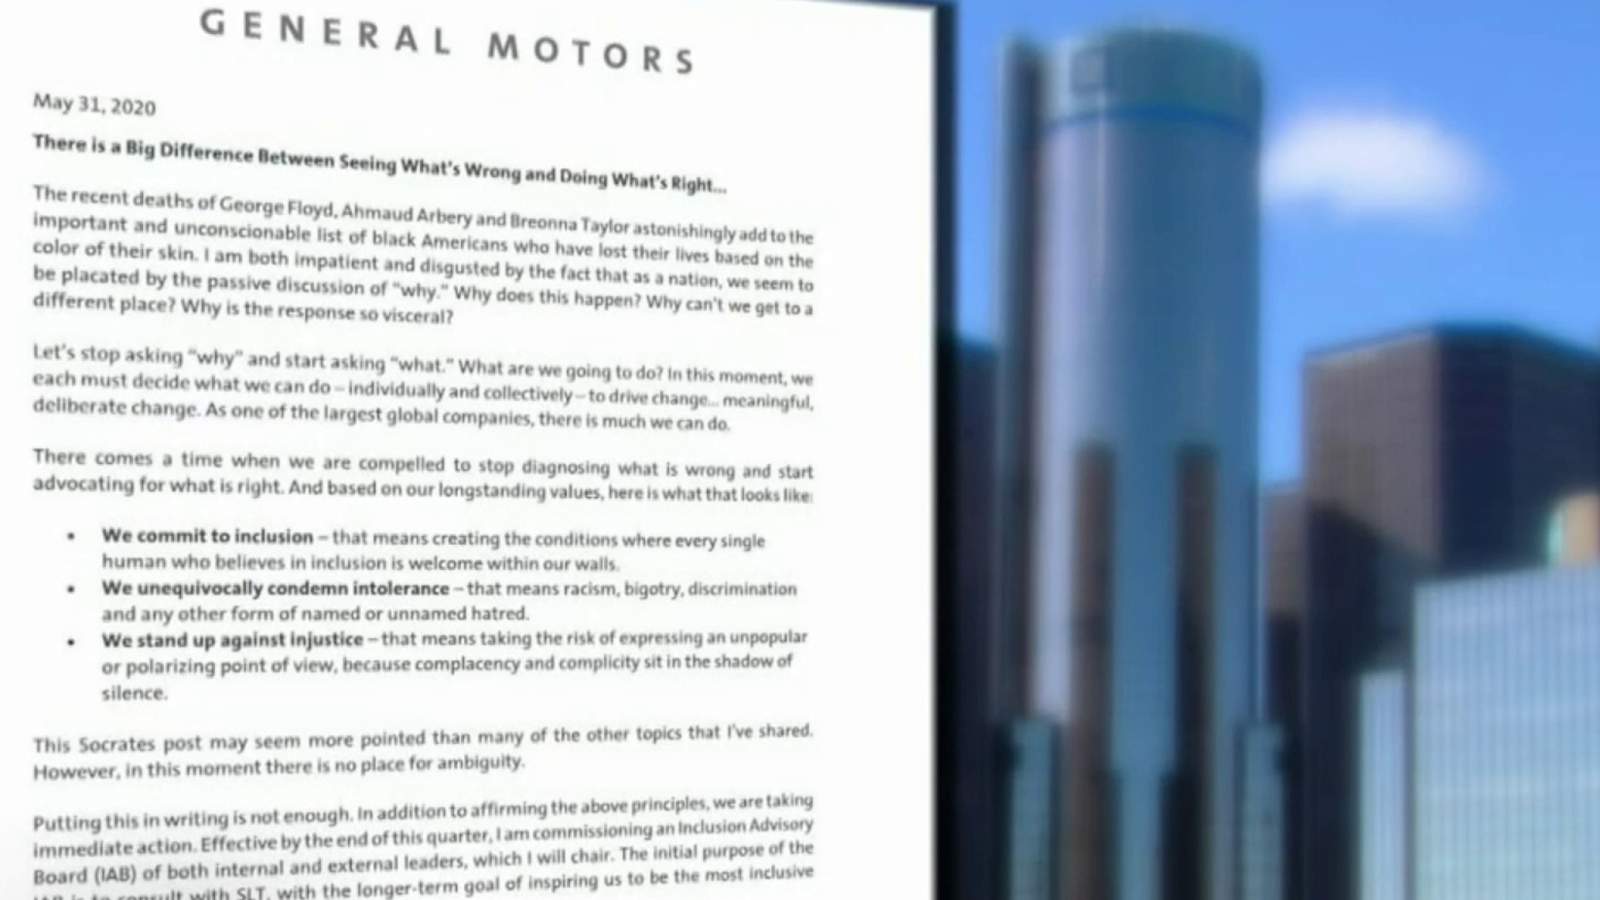 General Motors CEO address concerns protesters across the country are expressing